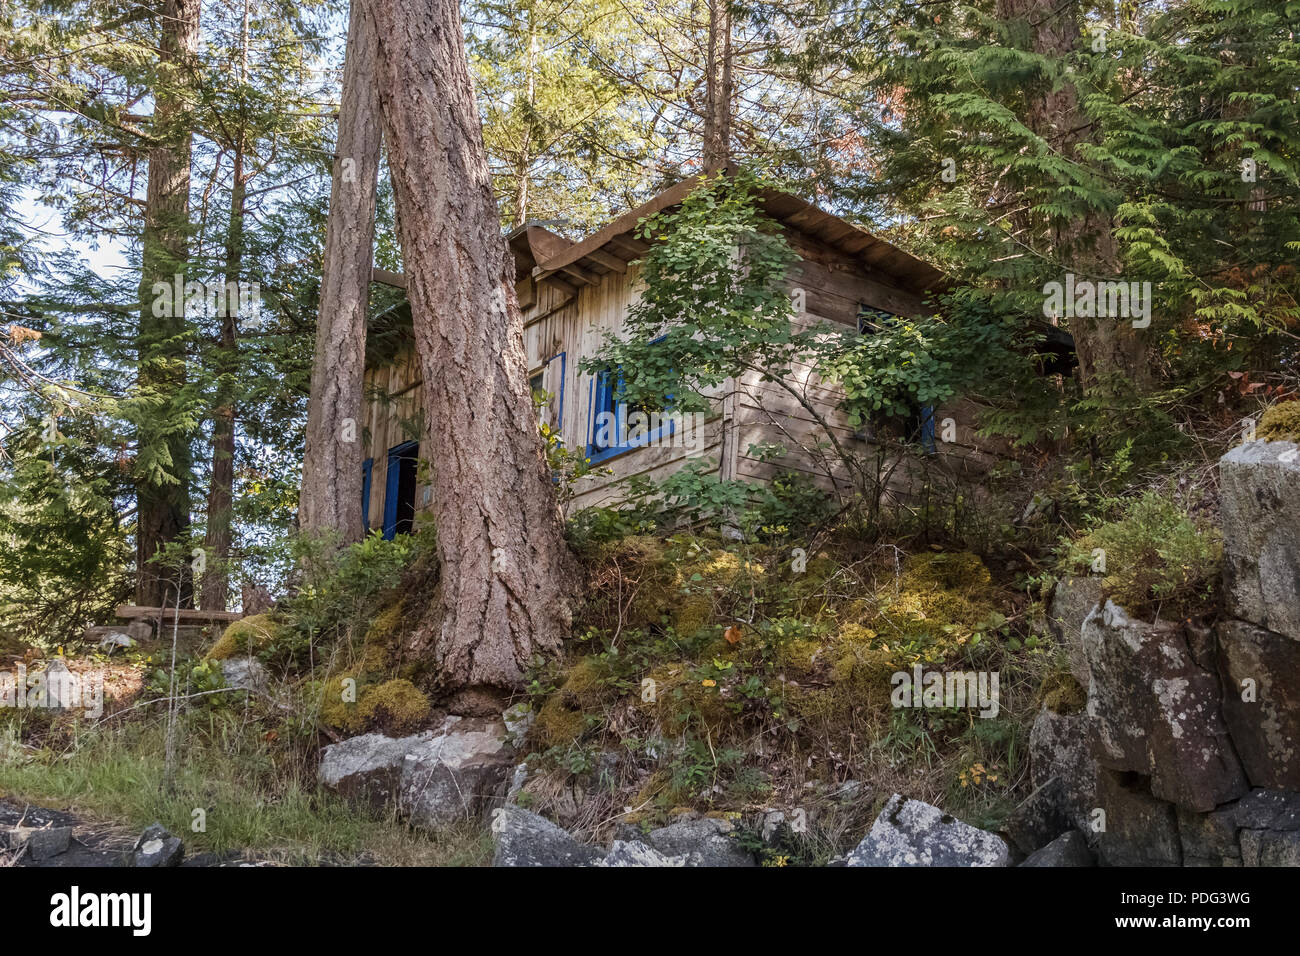 A small wooden cabin with blue window frames is nestled in a Douglas fir forest on a rocky hillside in coastal British Columbia (view from below). Stock Photo